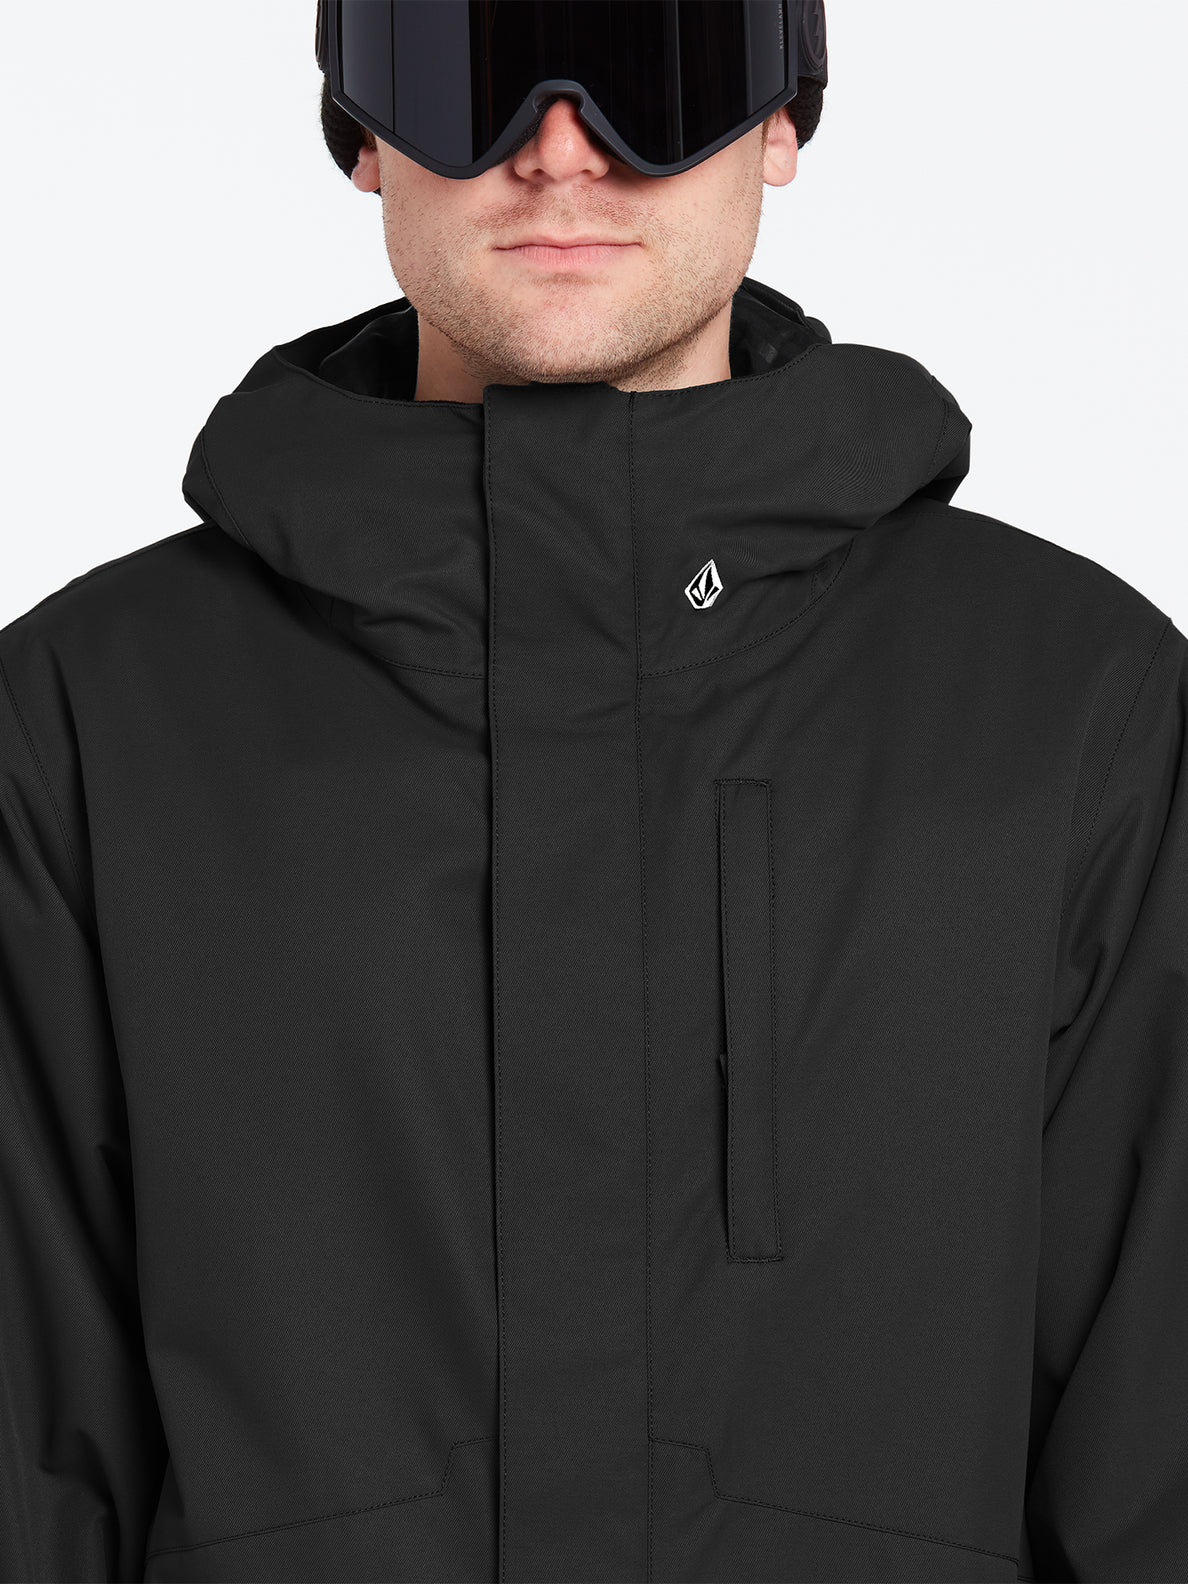 17Forty Insulated Jacket - BLACK (G0452114_BLK) [55]